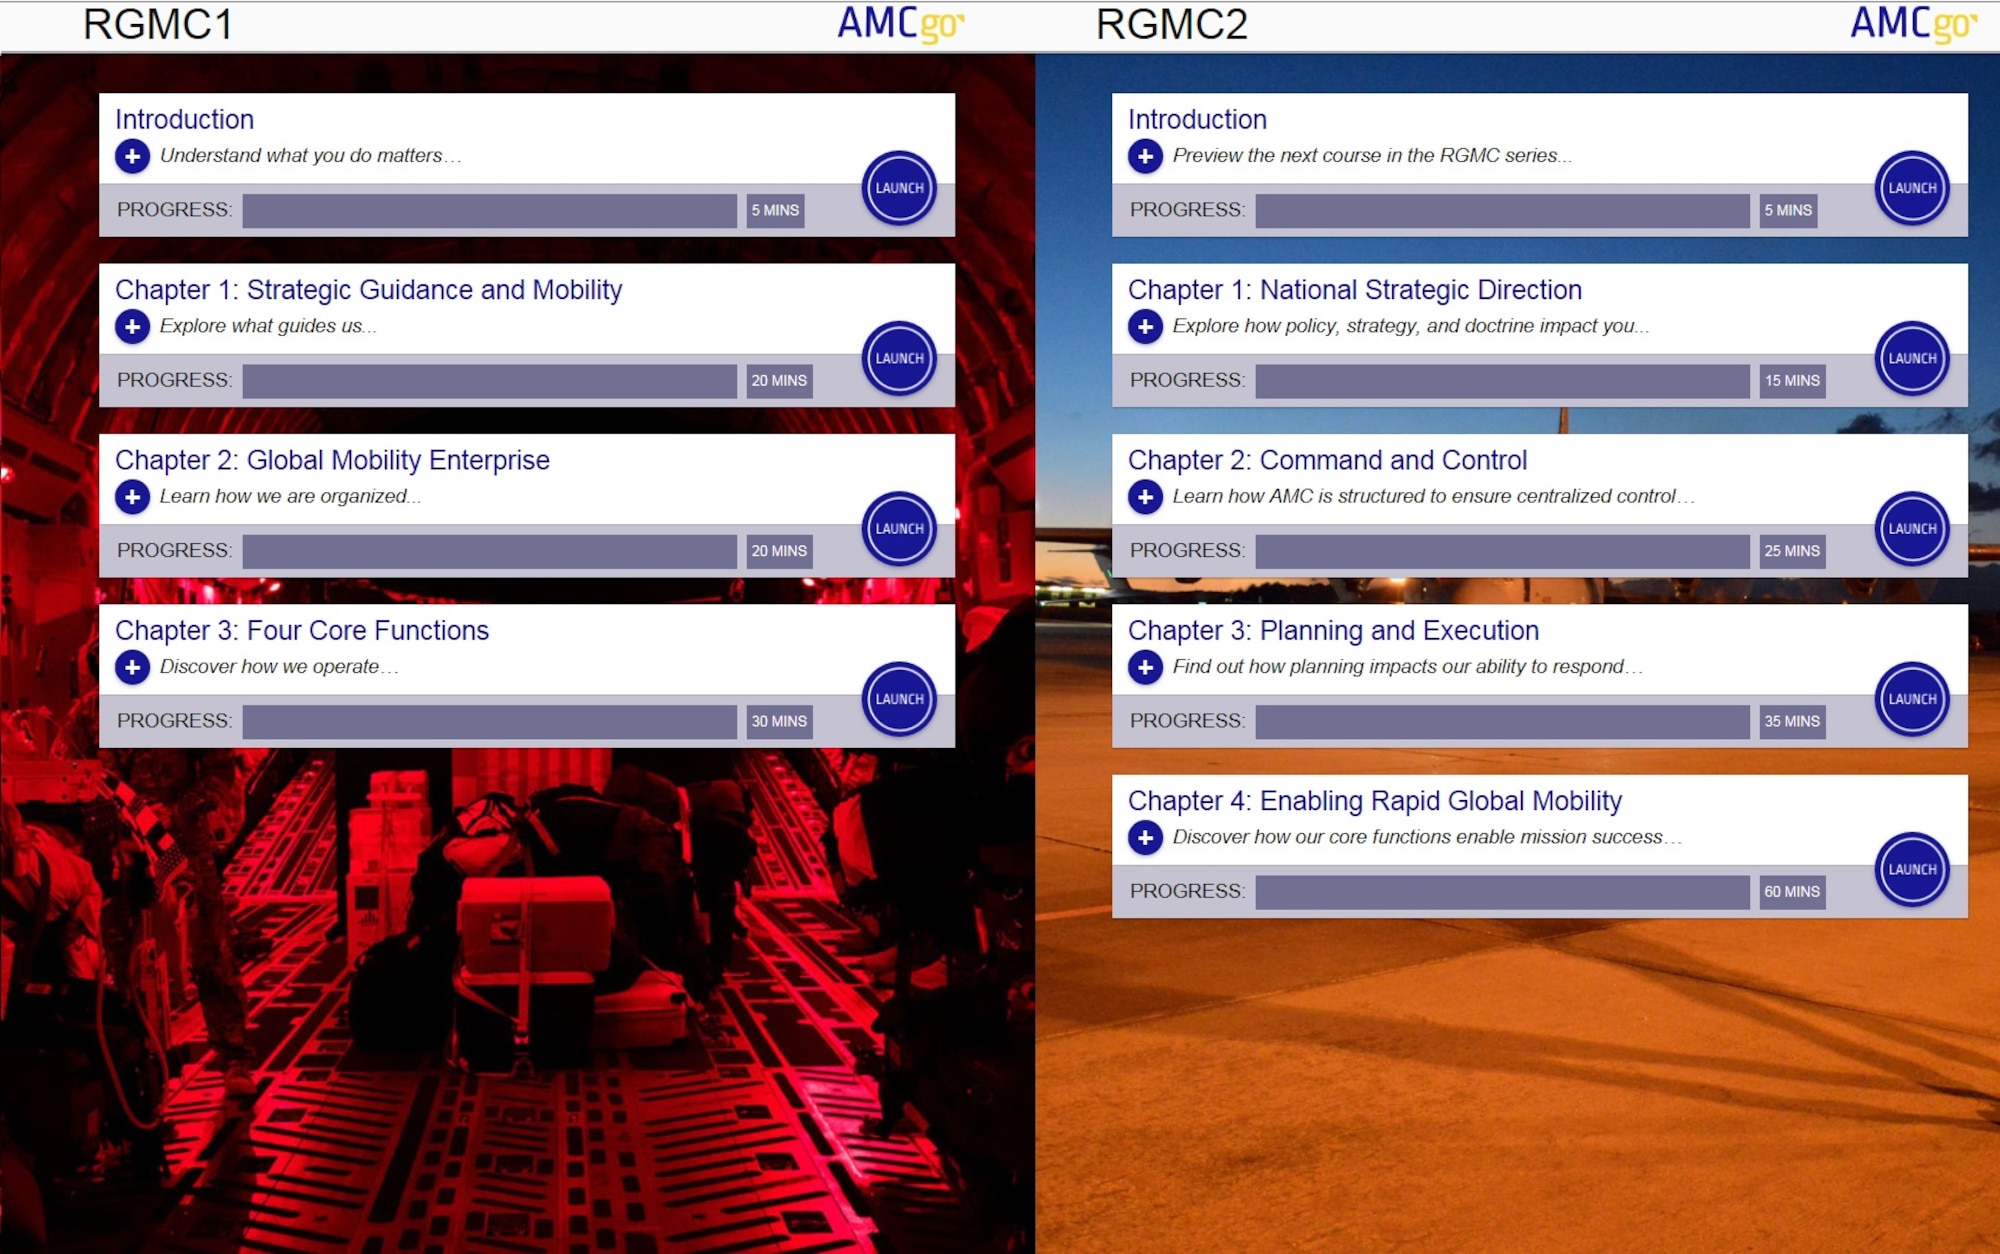 Shown are the RGMC 1 and 2 course homepages from the AMCgo app. To navigate to these courses and other resources visit https://amcgo-staging.learning-transformation.com/ 